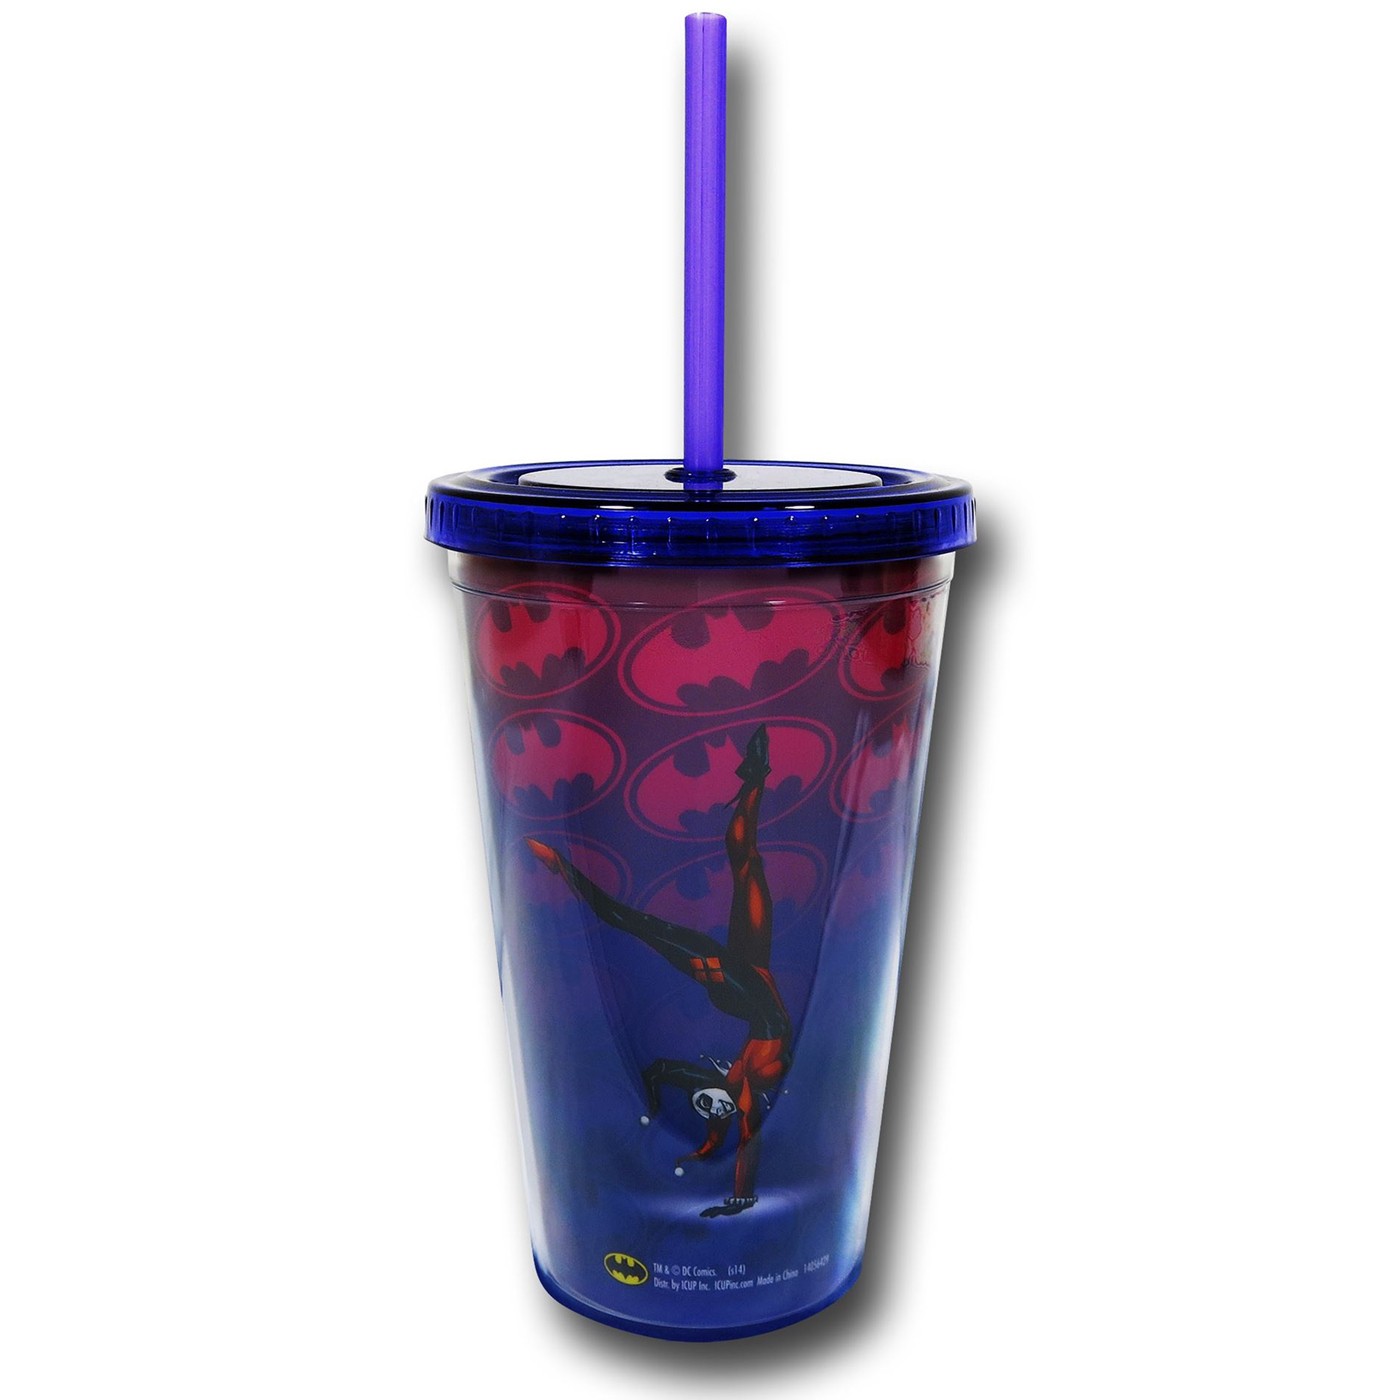 Harley Quinn Lit Fuse Cold Cup w/ Straw